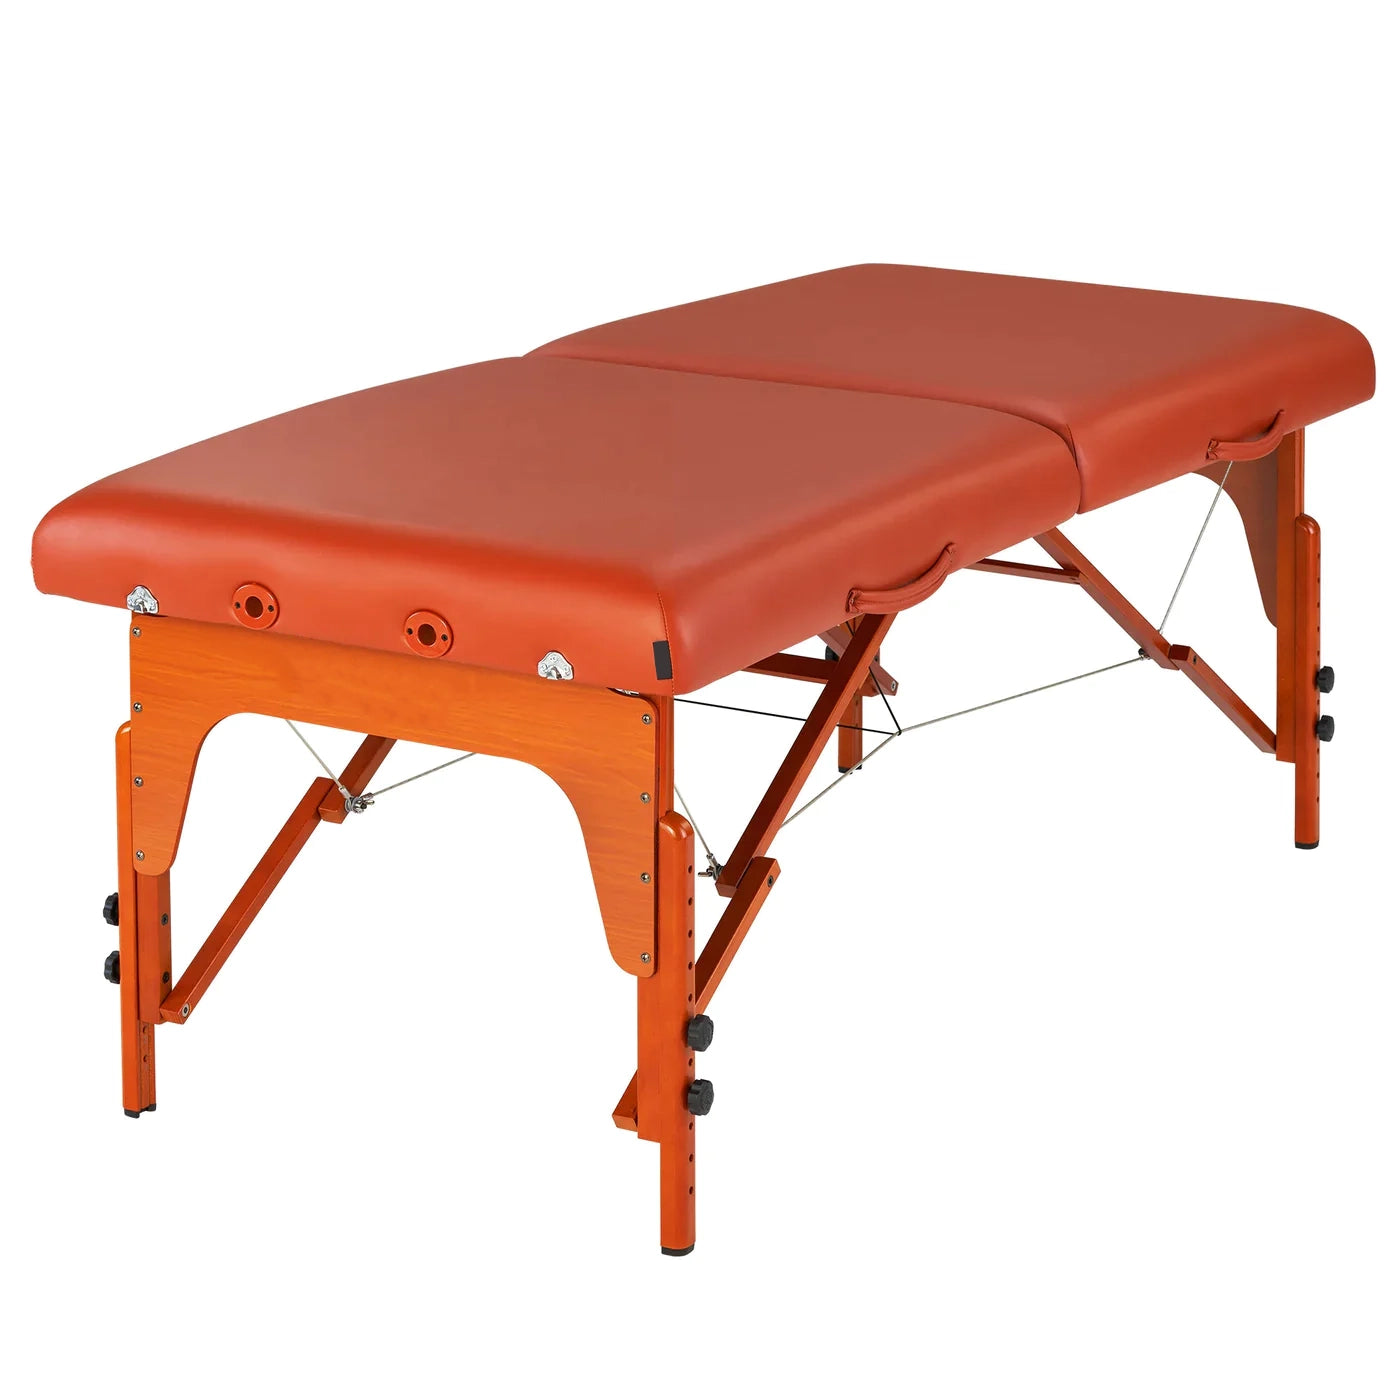 Spabodega 31" SANTANA™ Portable Massage Table Package with Ambient Light System